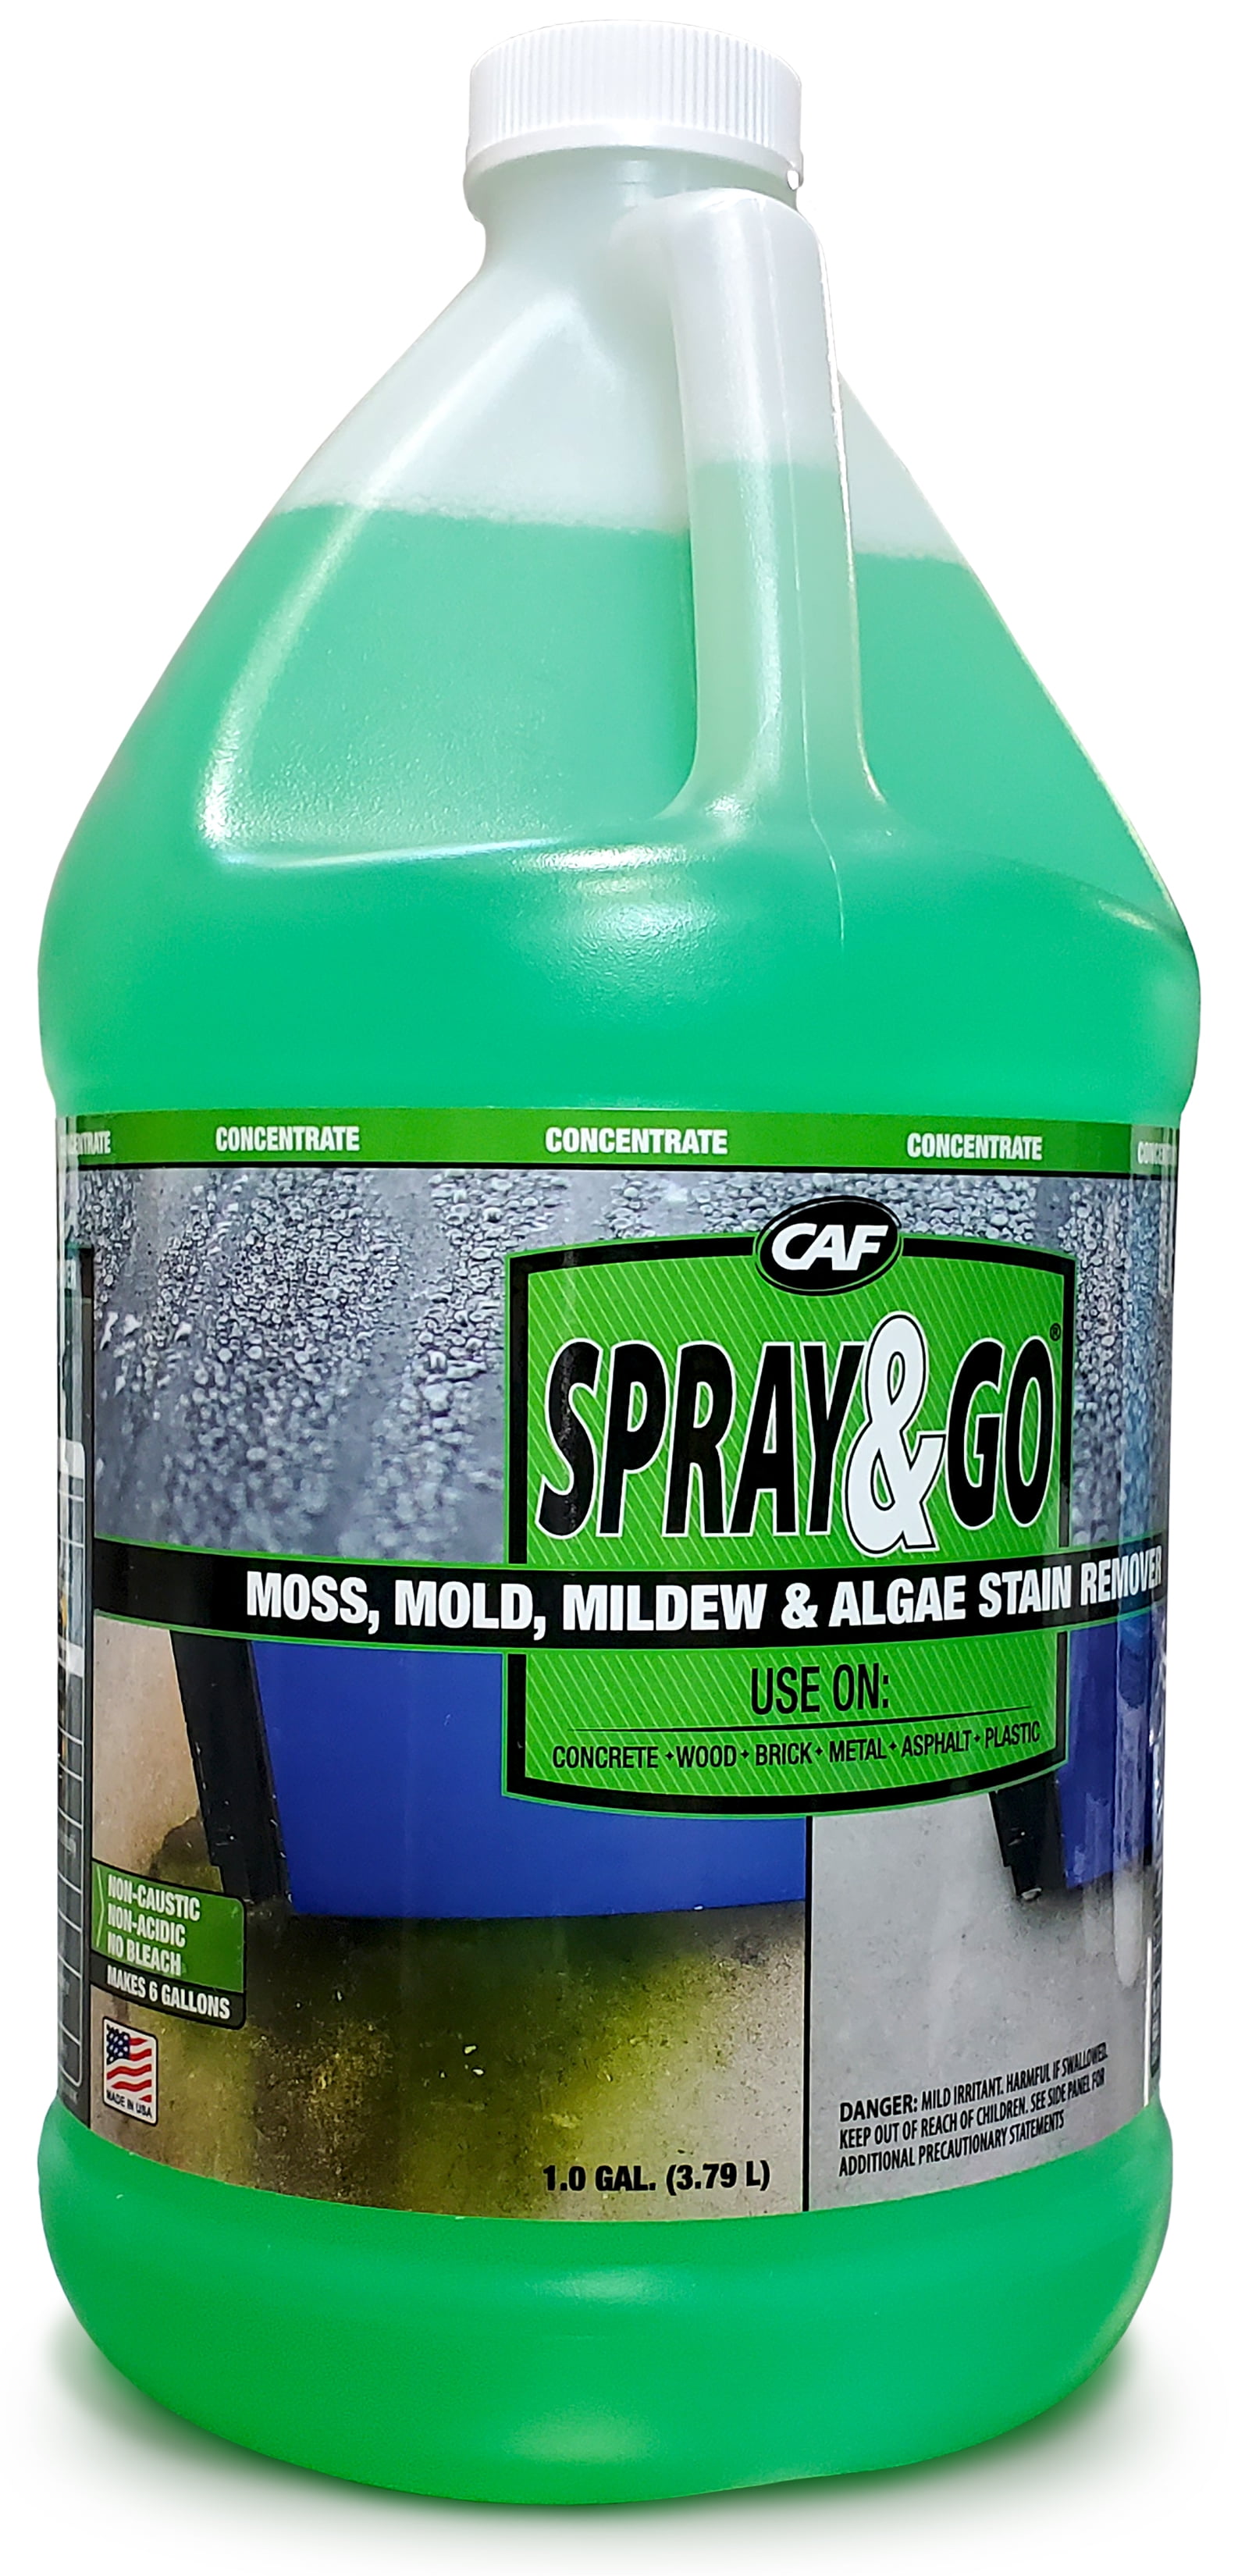 Wet & Forget Outdoor Liquid Surface Cleaner & Stain Remover, Eliminate Mold  Mildew & Algae Stains